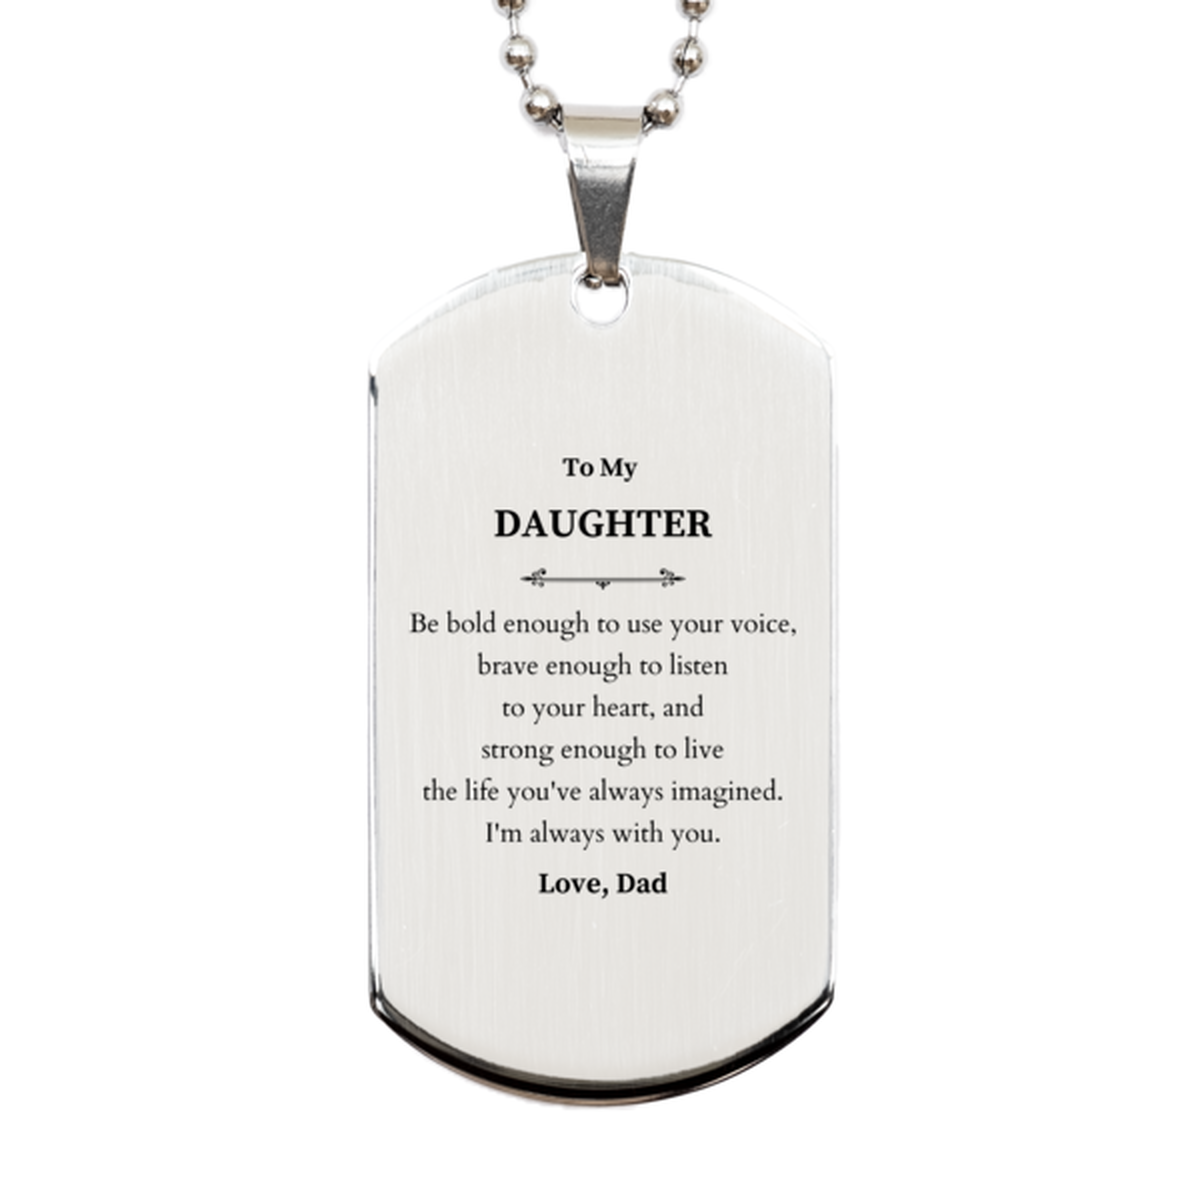 Keepsake Daughter Silver Dog Tag Gift Idea Graduation Christmas Birthday Daughter from Dad, Daughter Be bold enough to use your voice, brave enough to listen to your heart. Love, Dad